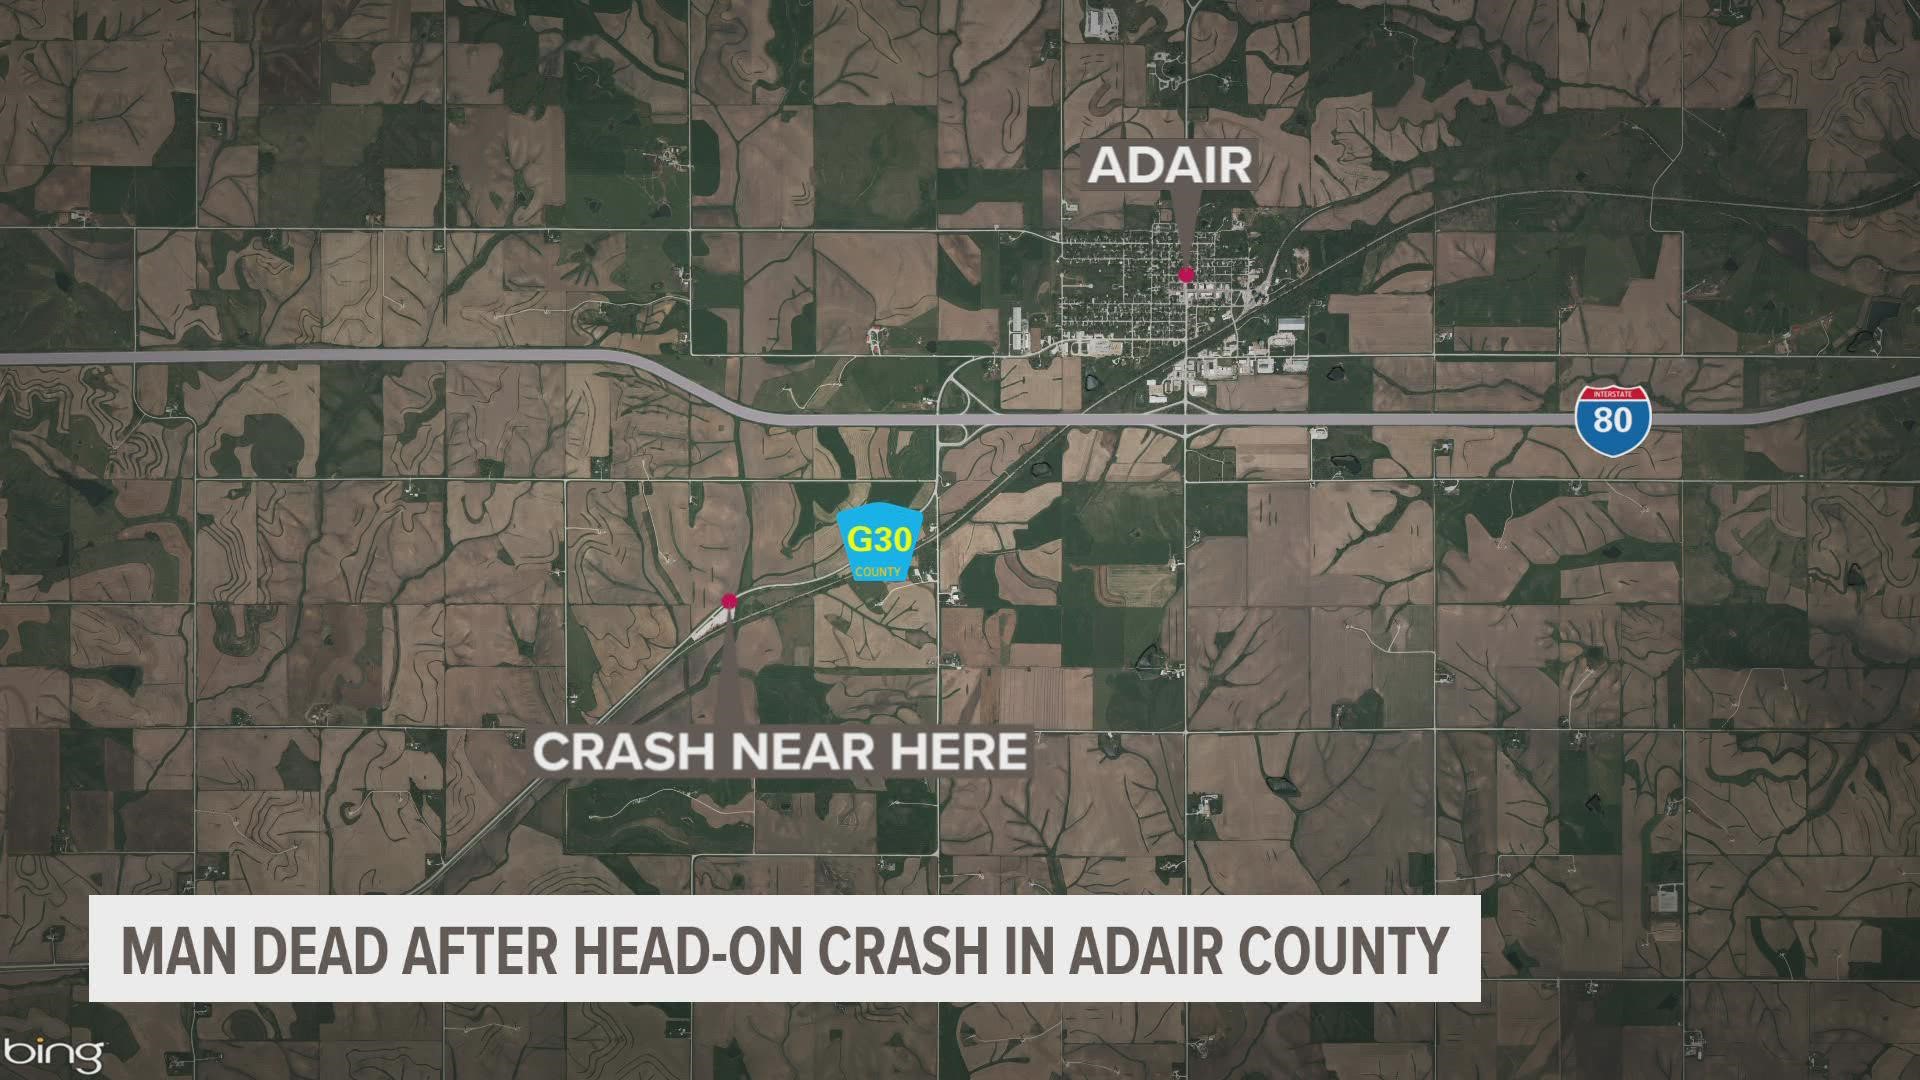 Officials say that a driver crossed the center line and hit a vehicle "head on" around 9:20 a.m. Thursday morning.